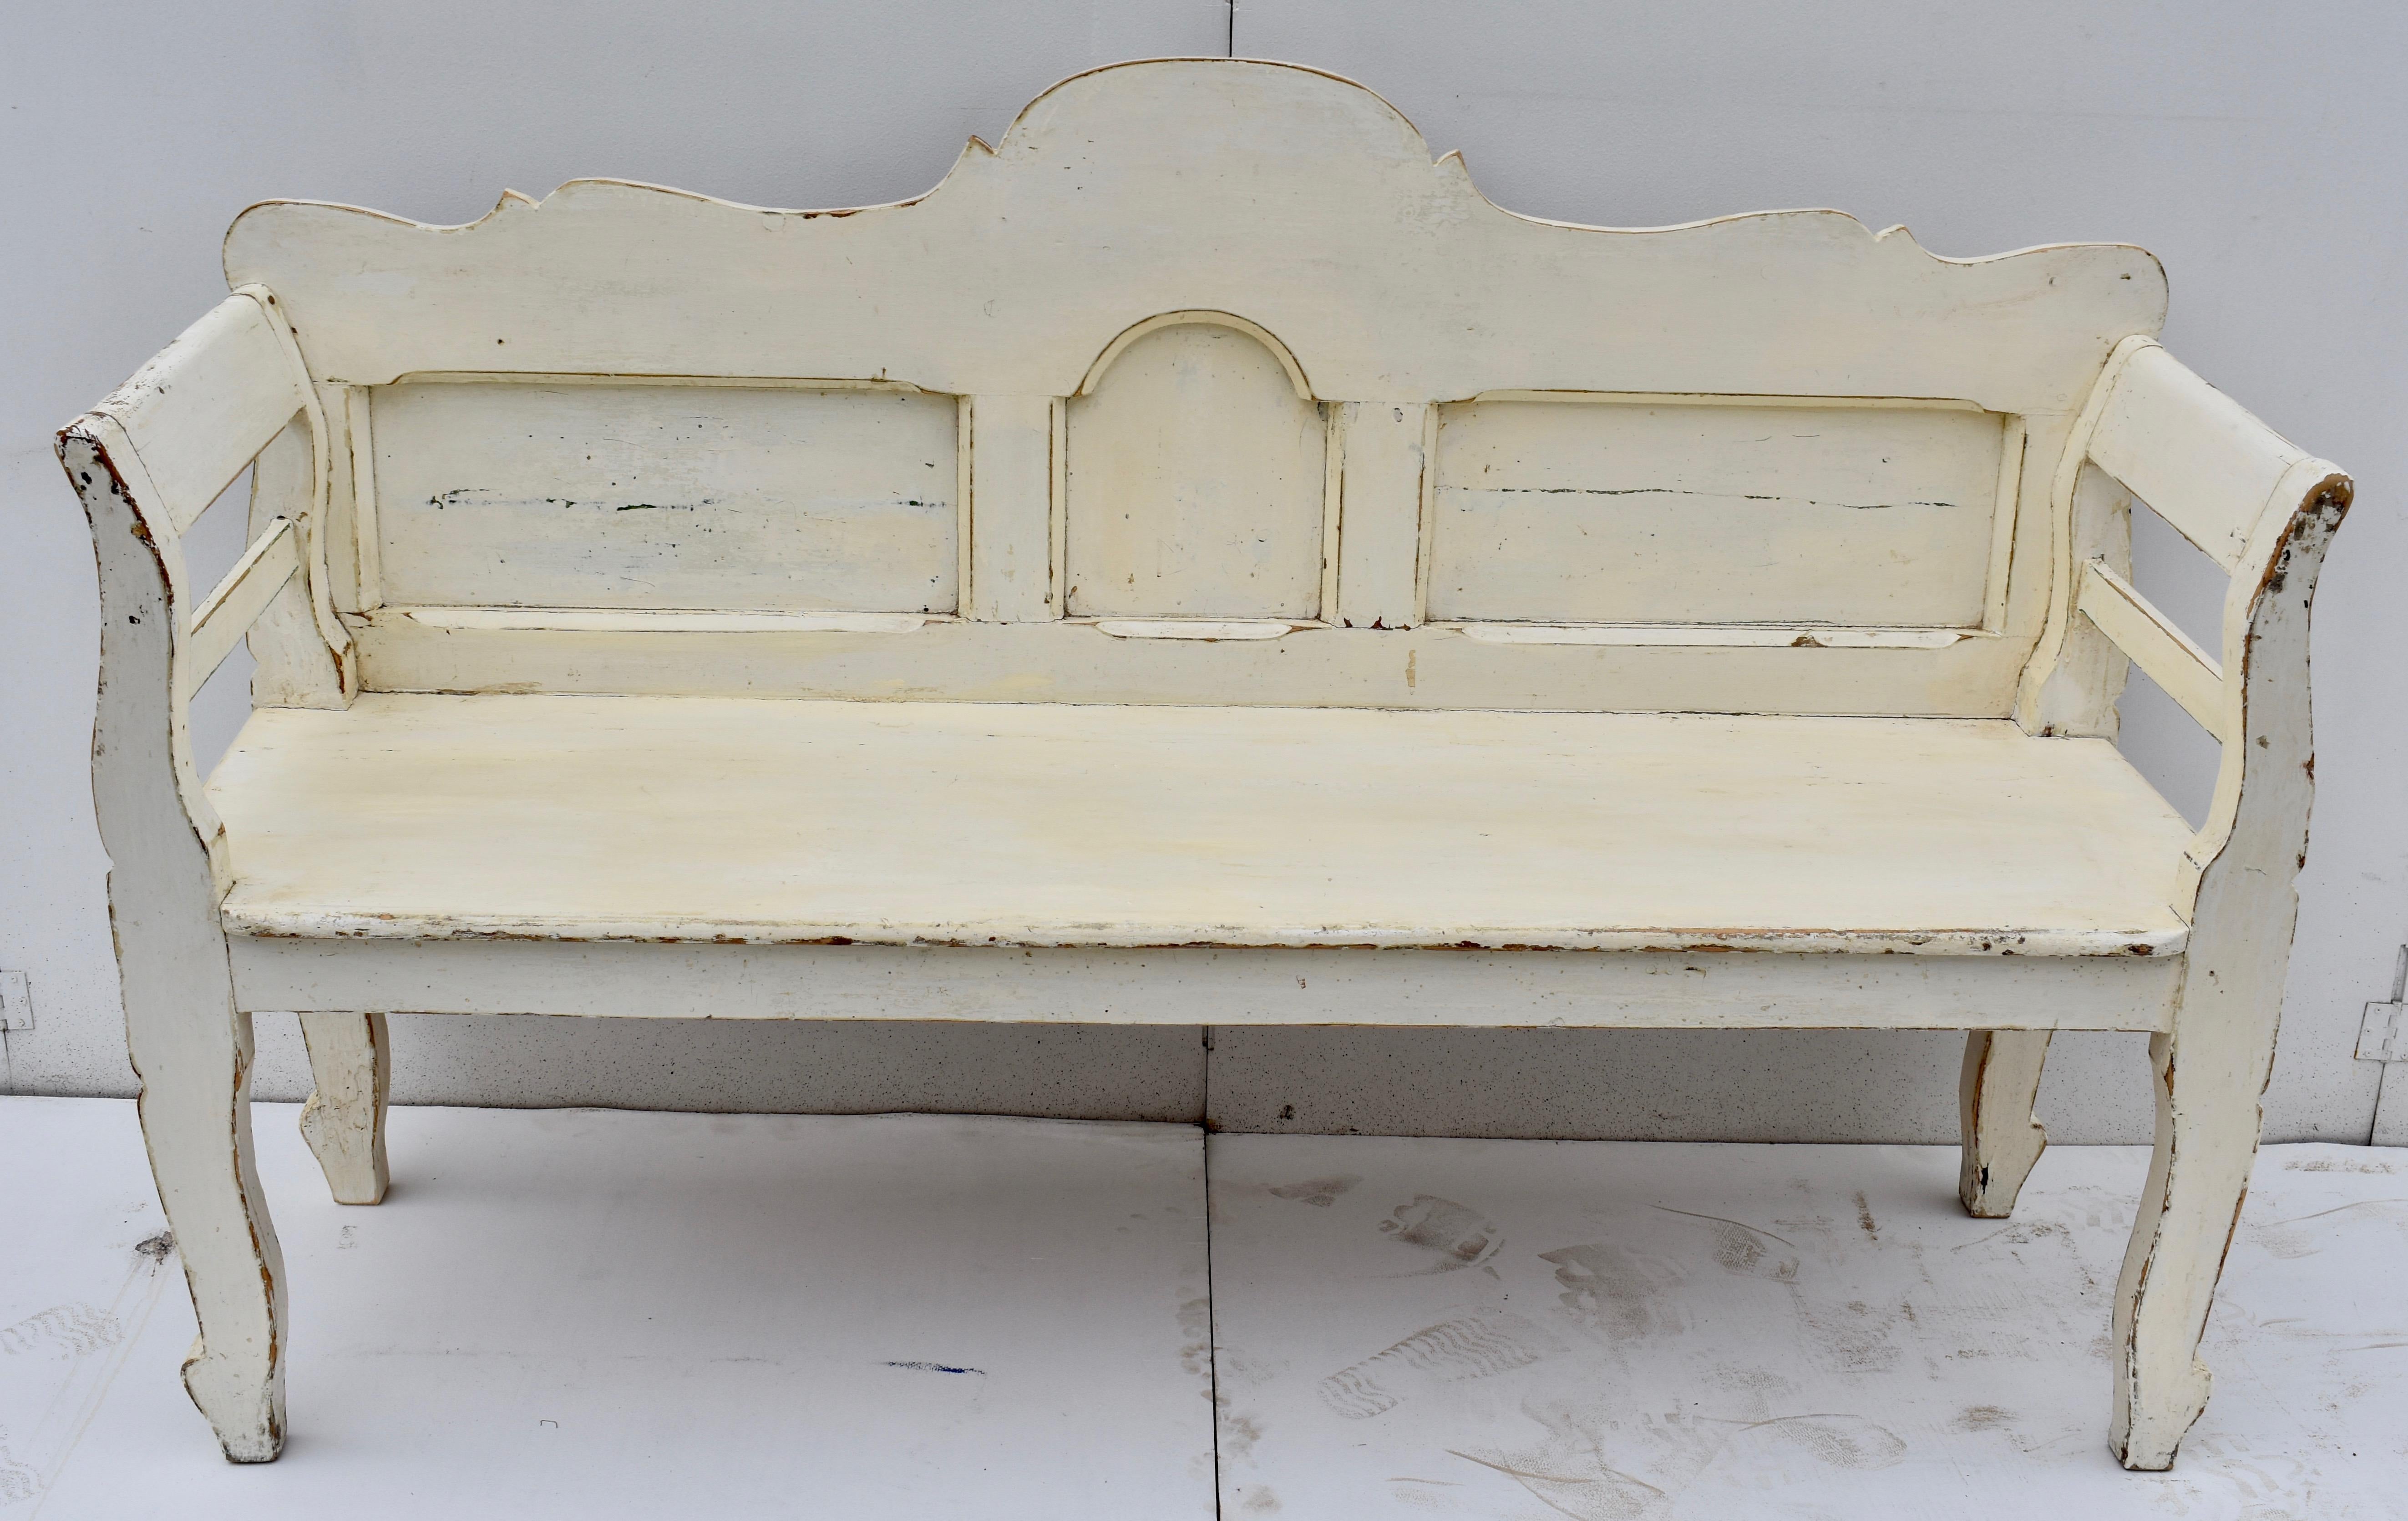 This sturdy bench has a terrific form. Its scalloped back rail has a high central dome, gently undulating on each side. A small arched panel is flanked by two long rectangular panels with the rails and stiles of the back nicely chamfered at their